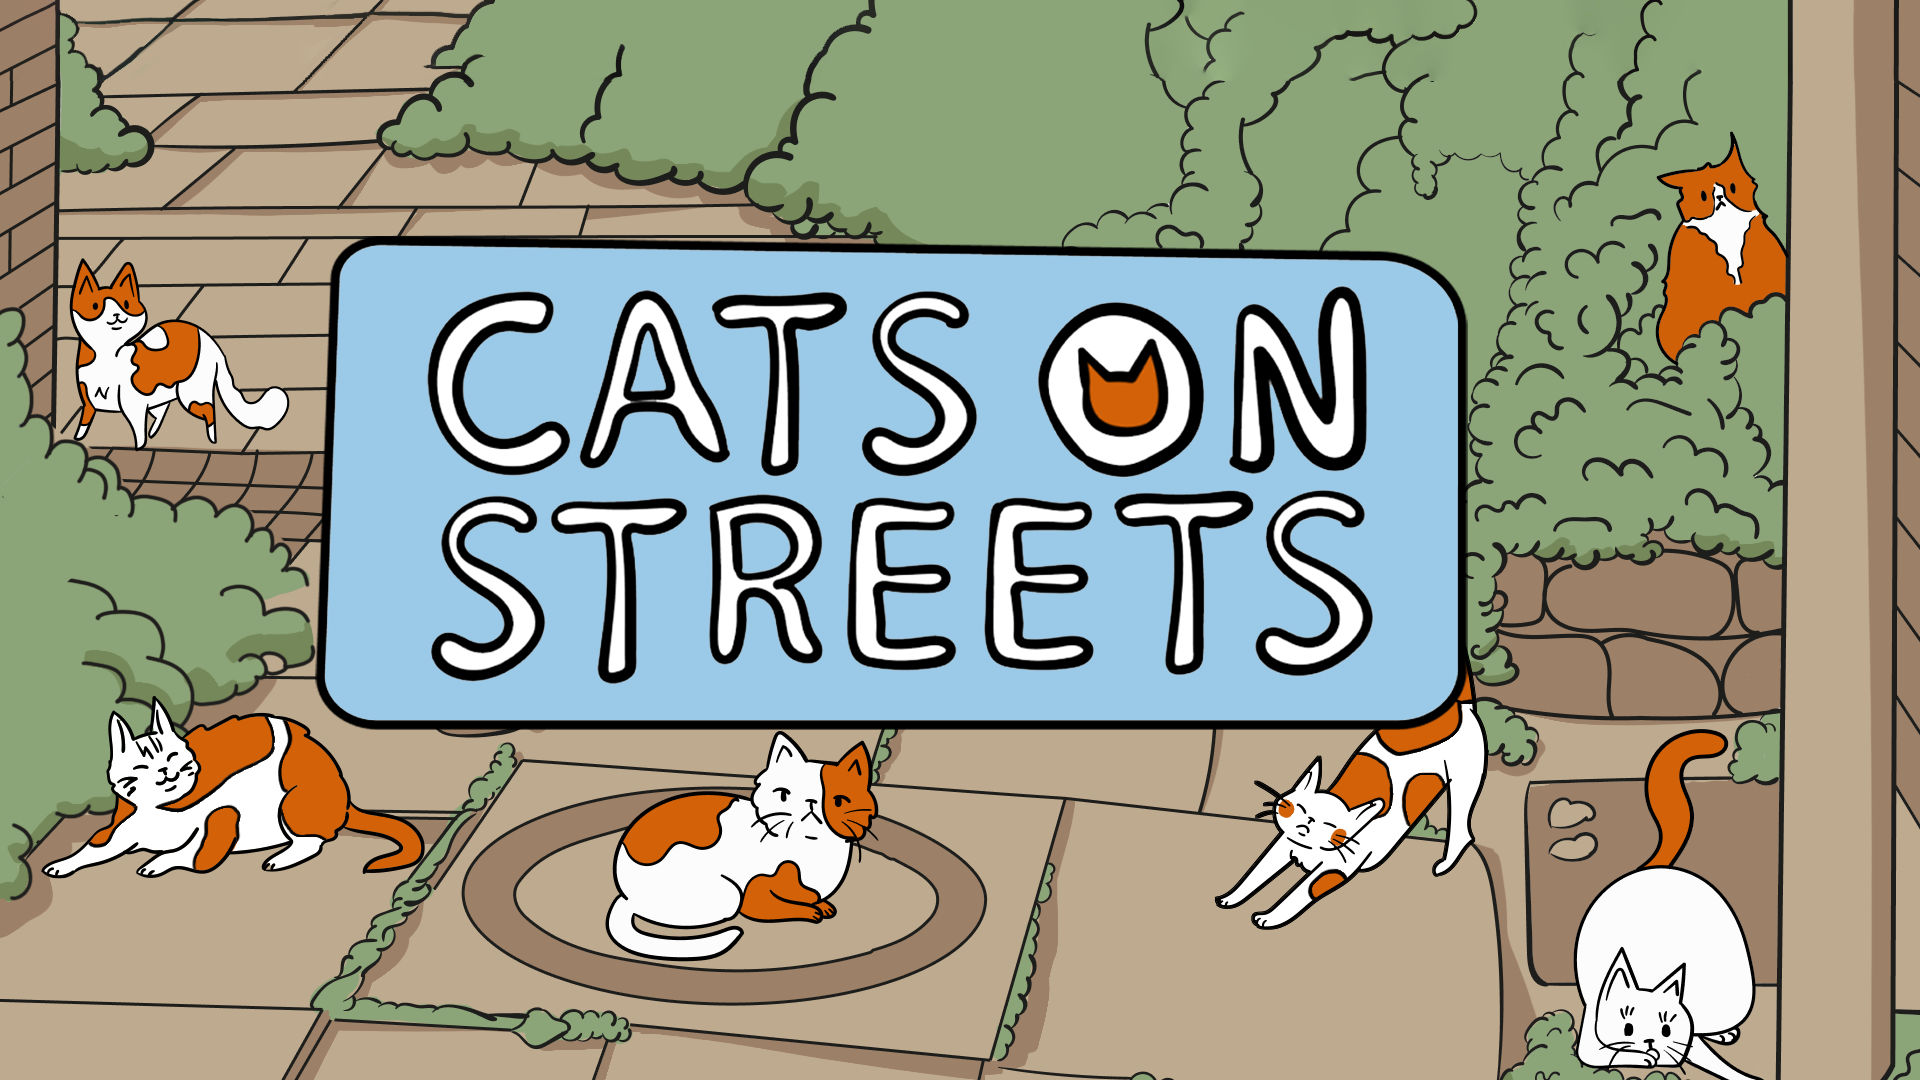 Cats on Streets